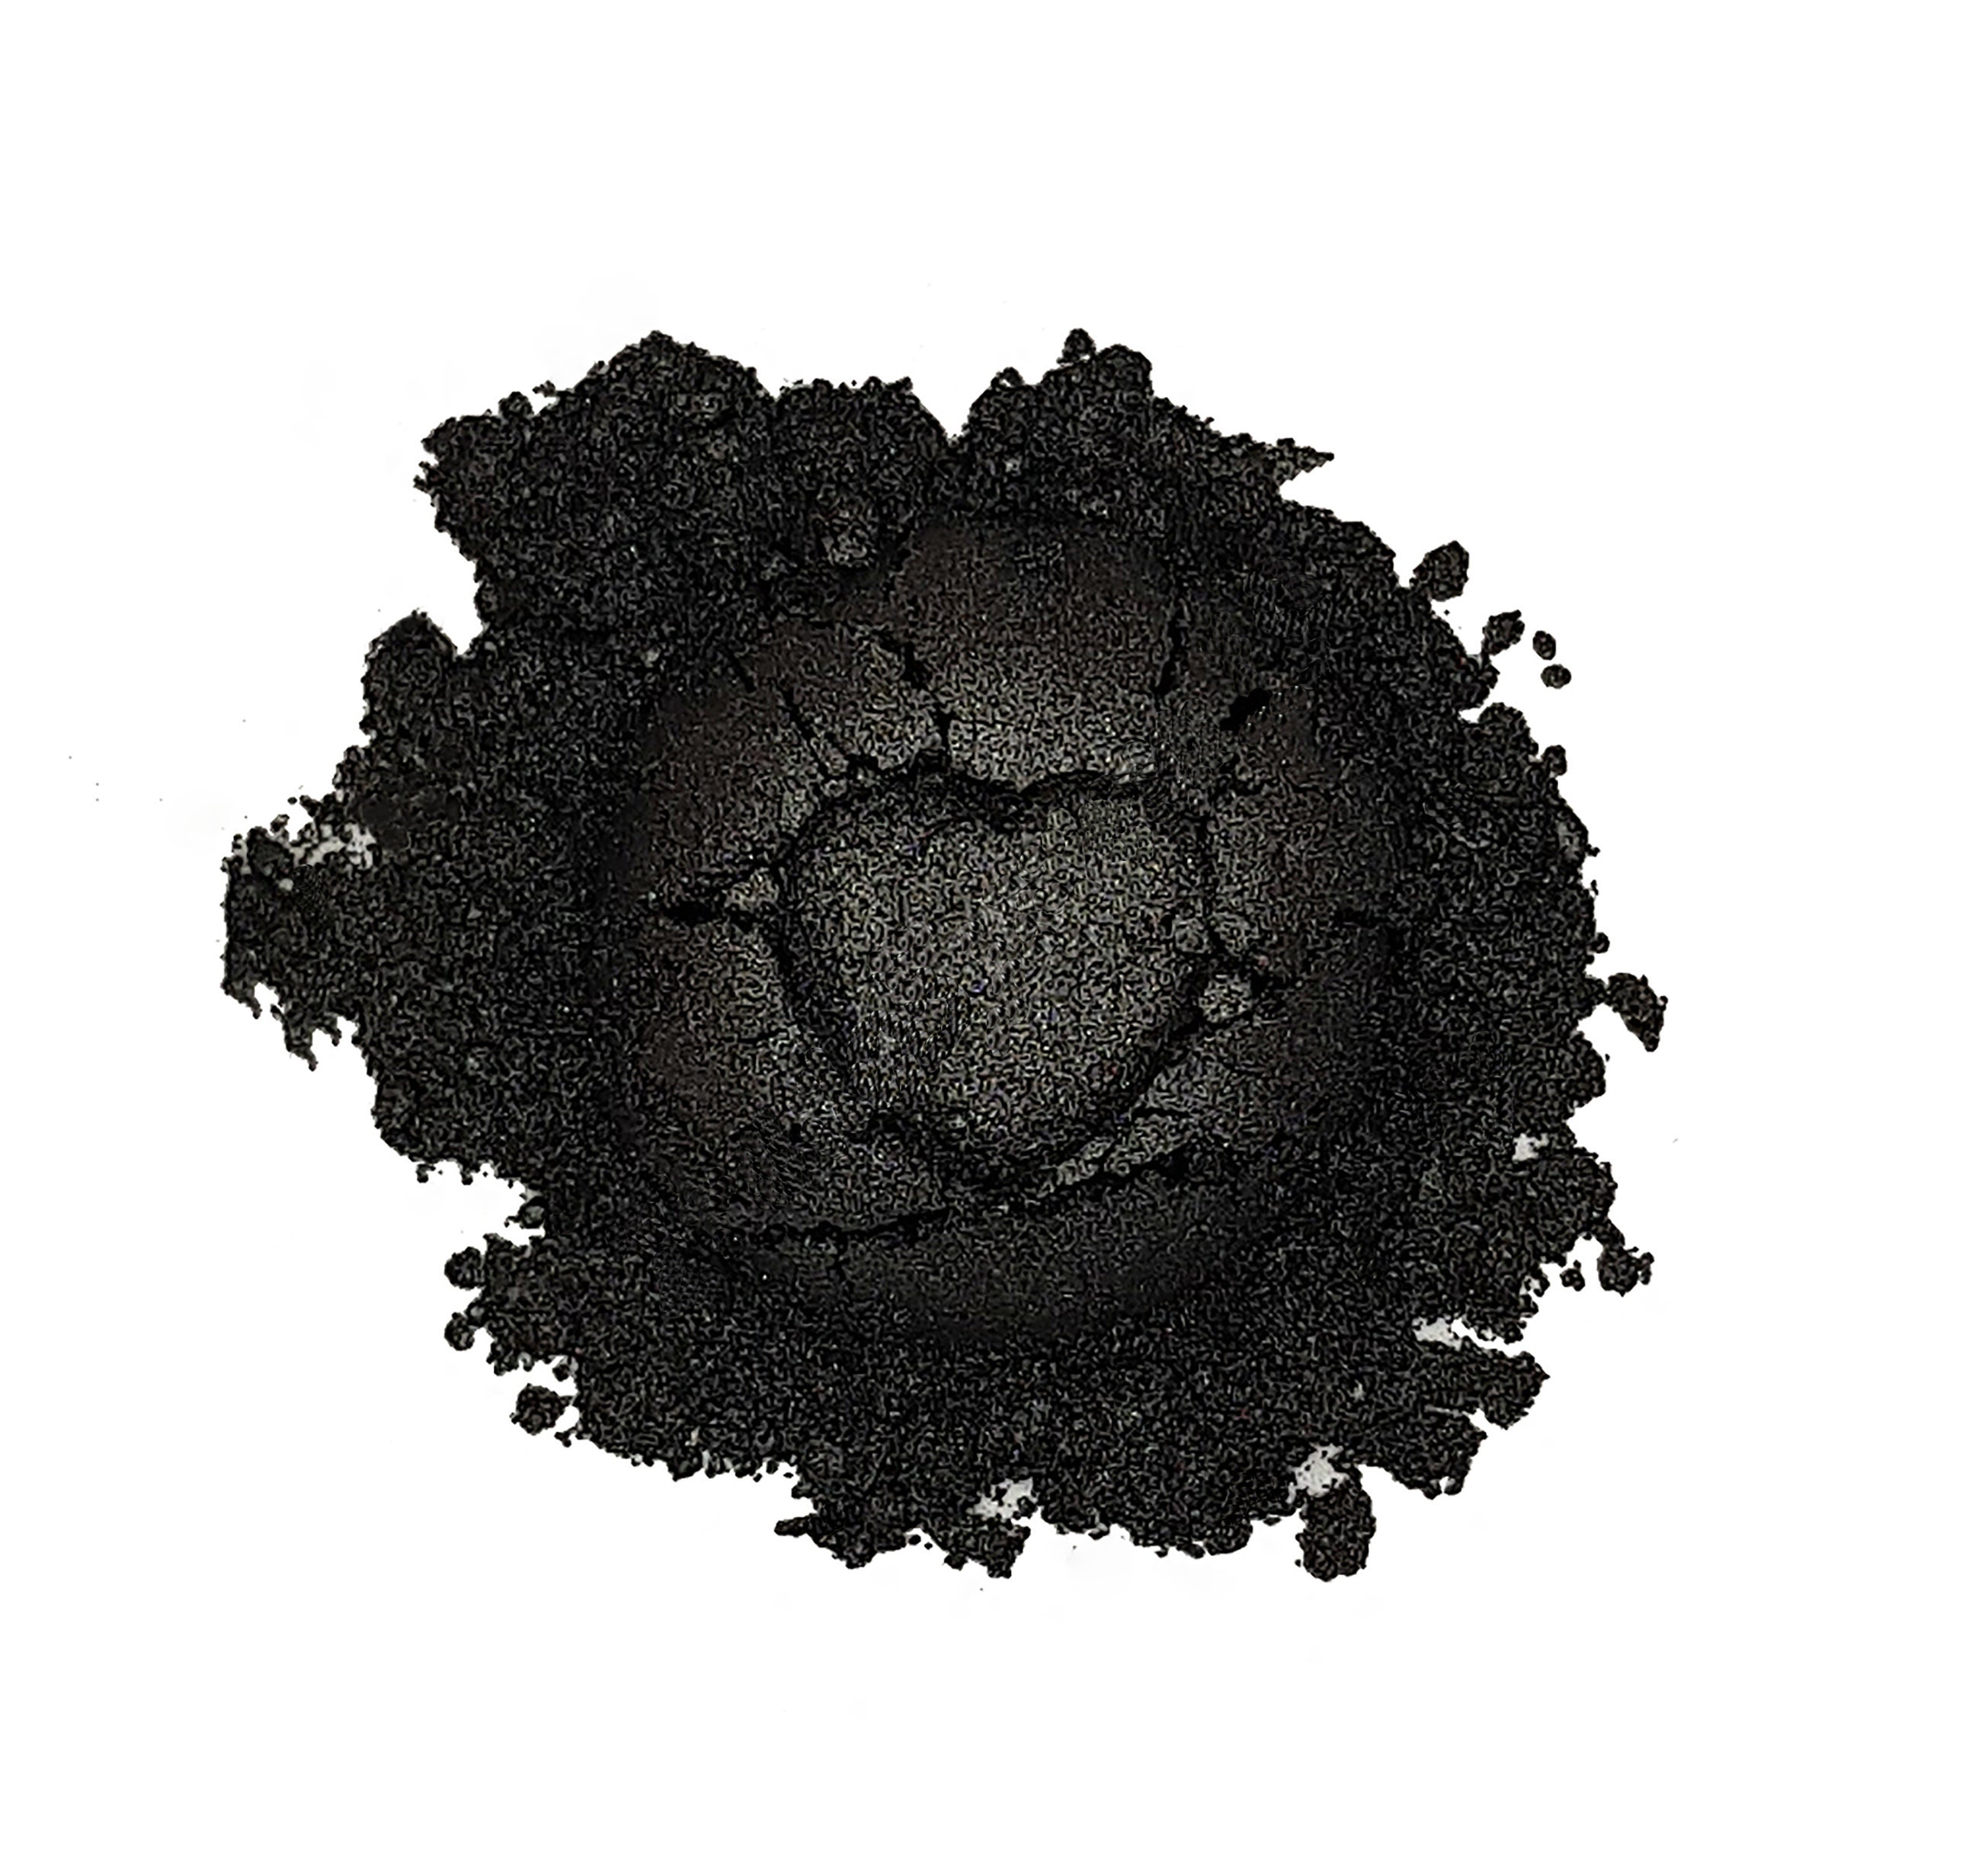 Baltic Day black Mica Powder for Epoxy Resin Art Black Pigment Powder for  Resin, Paint, Soap, Candles, Bath Bombs, Nail Polish, Slime 